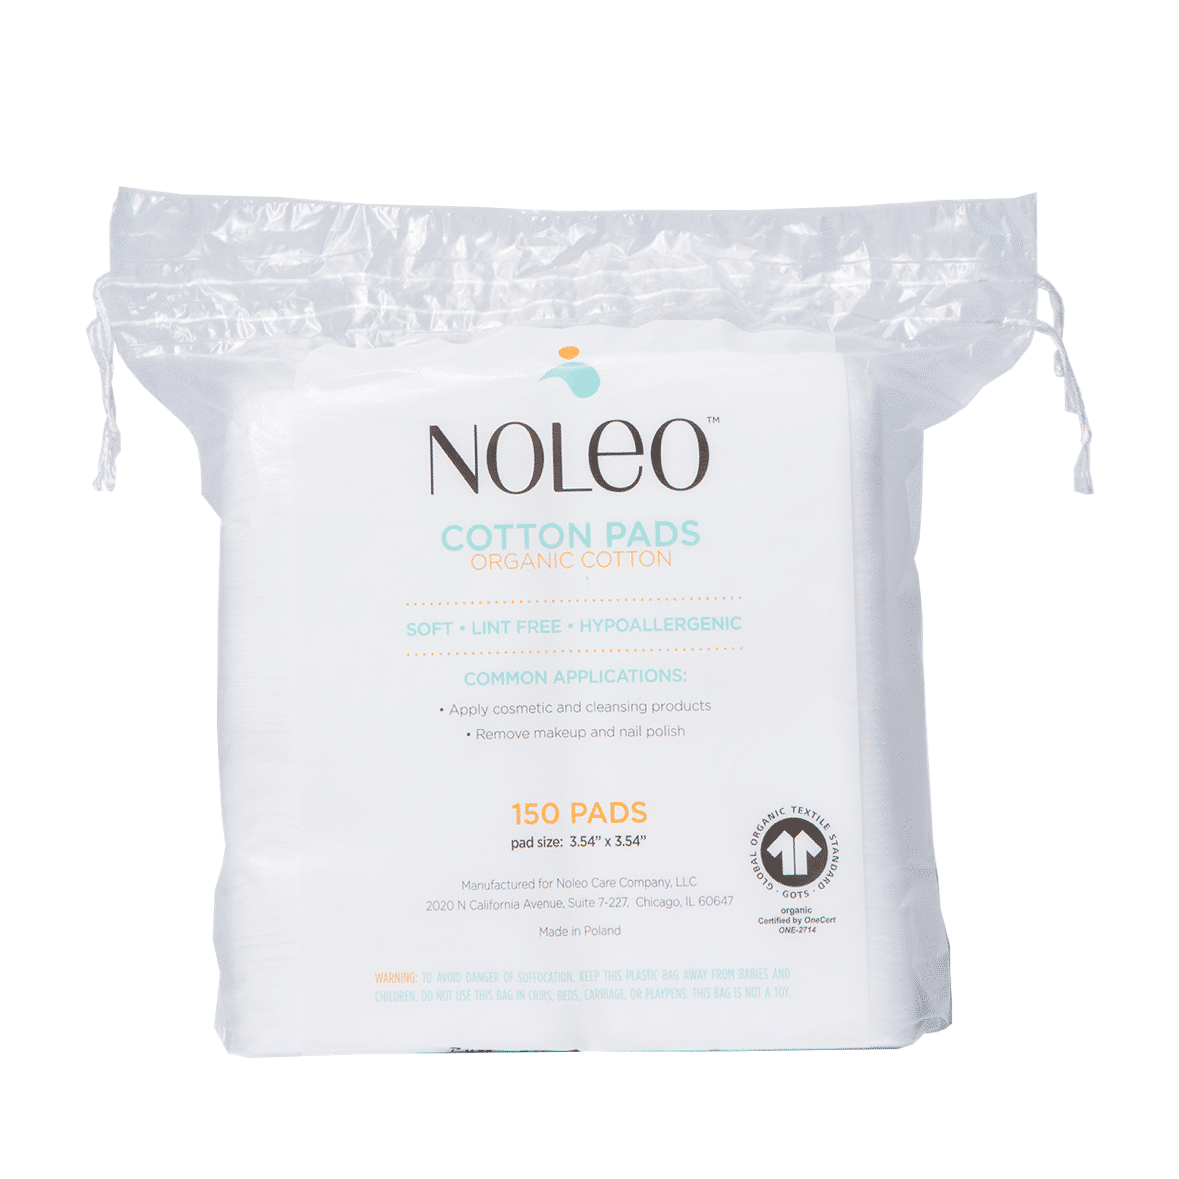 Noleo Organic Cotton Pads from gimme the good stuff